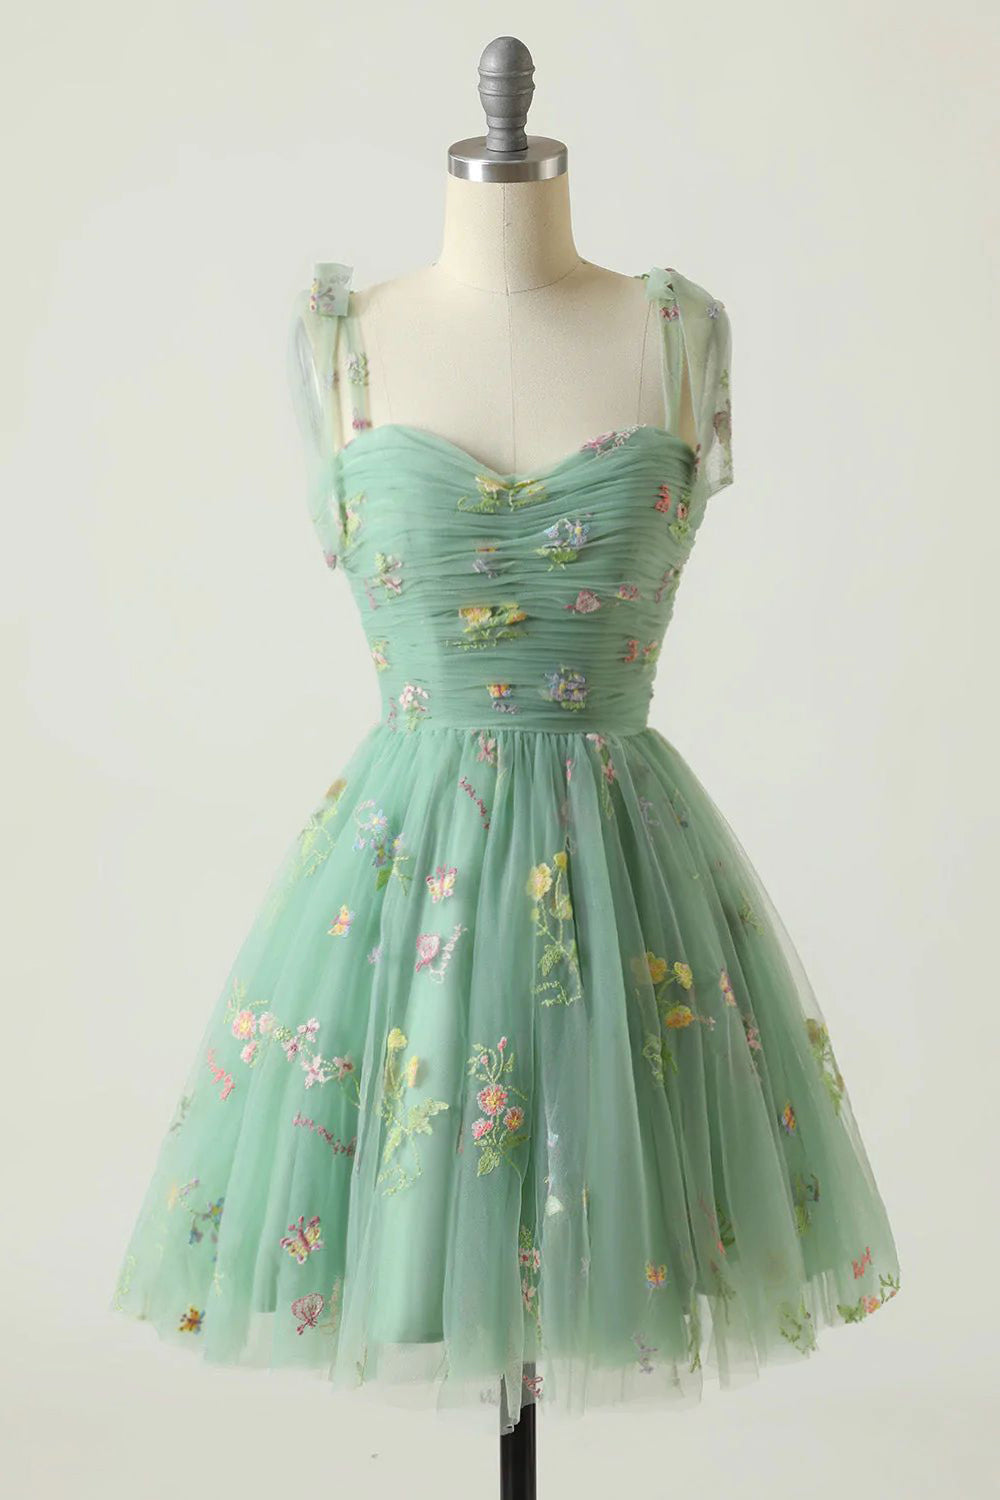 Bridesmaid Dresses With Sleeve, Green Spaghetti Straps Short Homecoming Dress with Embroidery